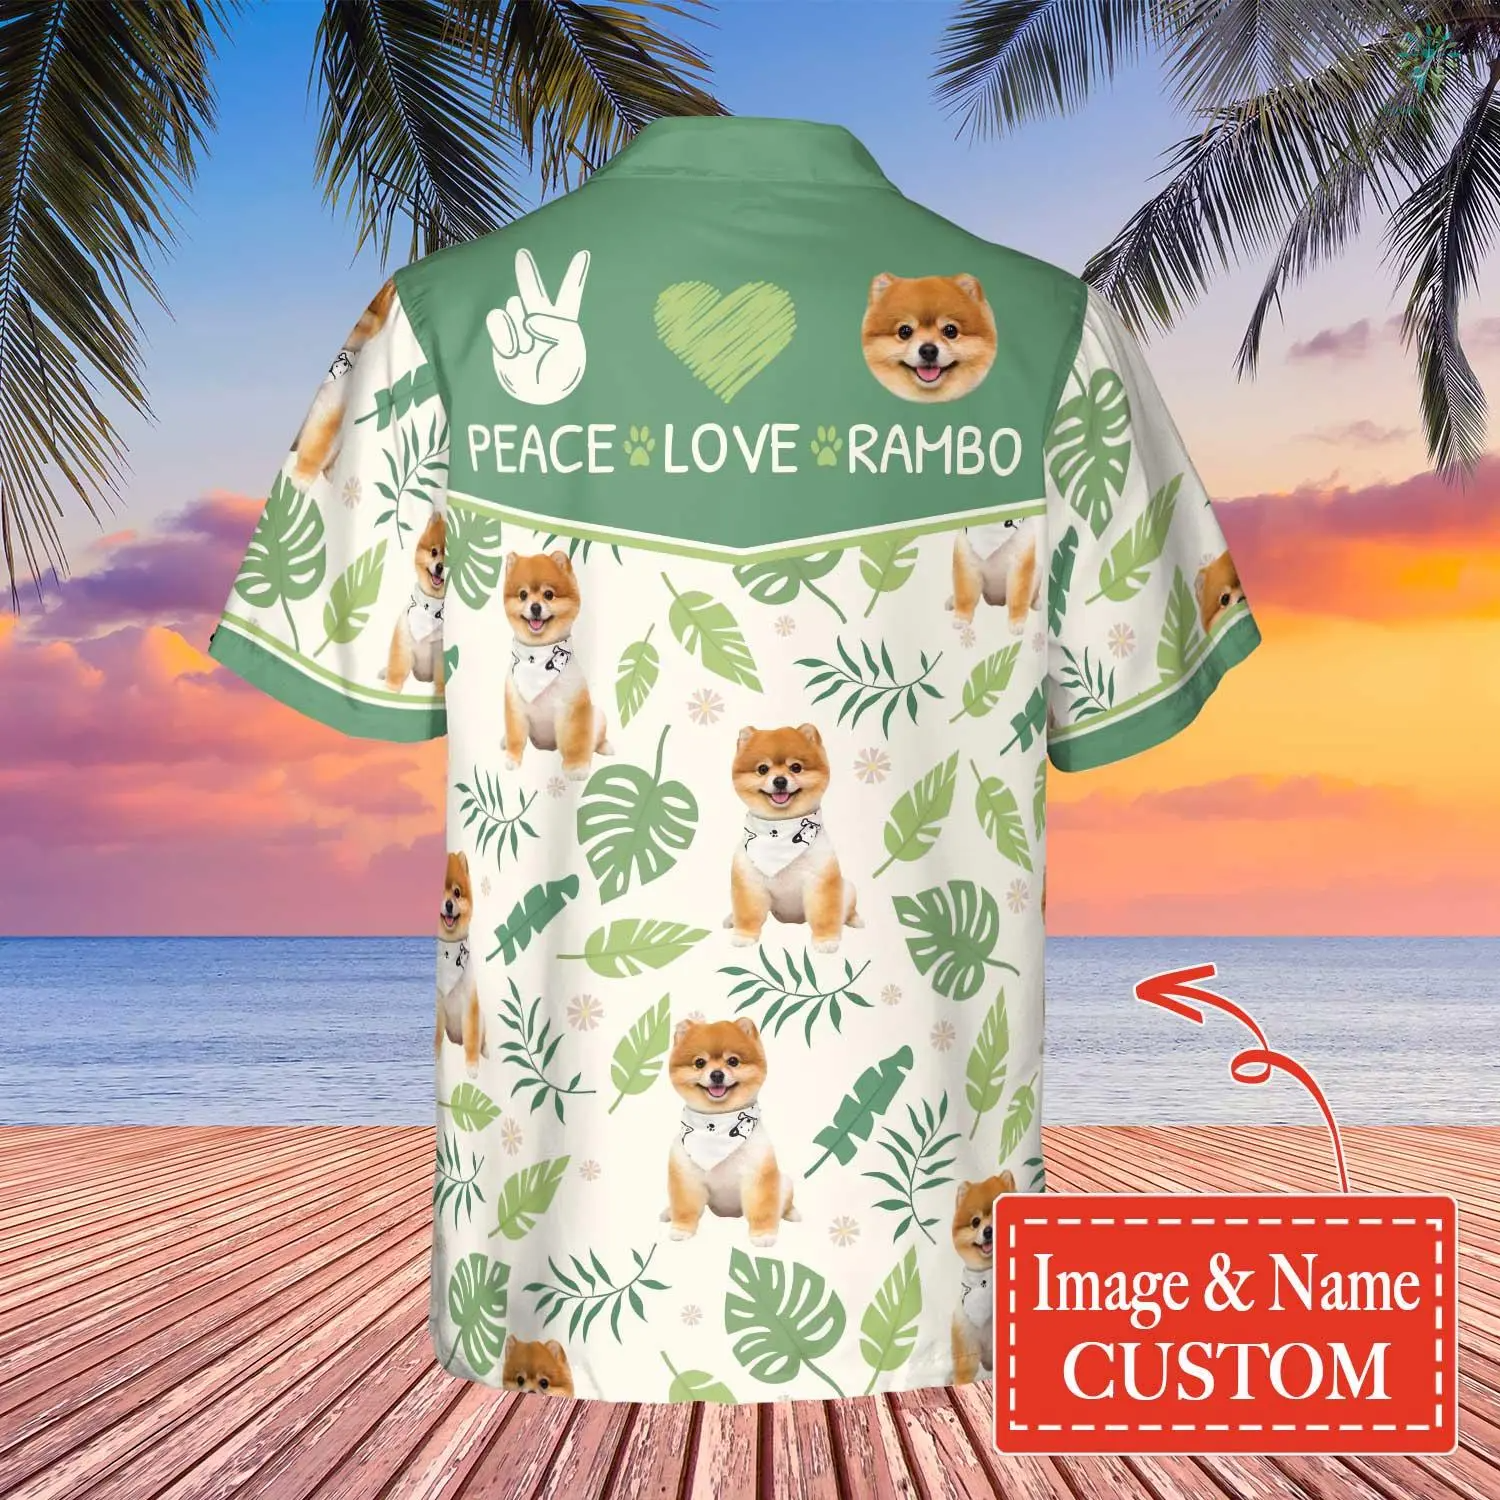 Custom Name And Image Dog Summer Hawaiian Shirt/ The Dog and The Leaves Shirt/ Gift for Men Women/ Idea Gift for Dog Lover